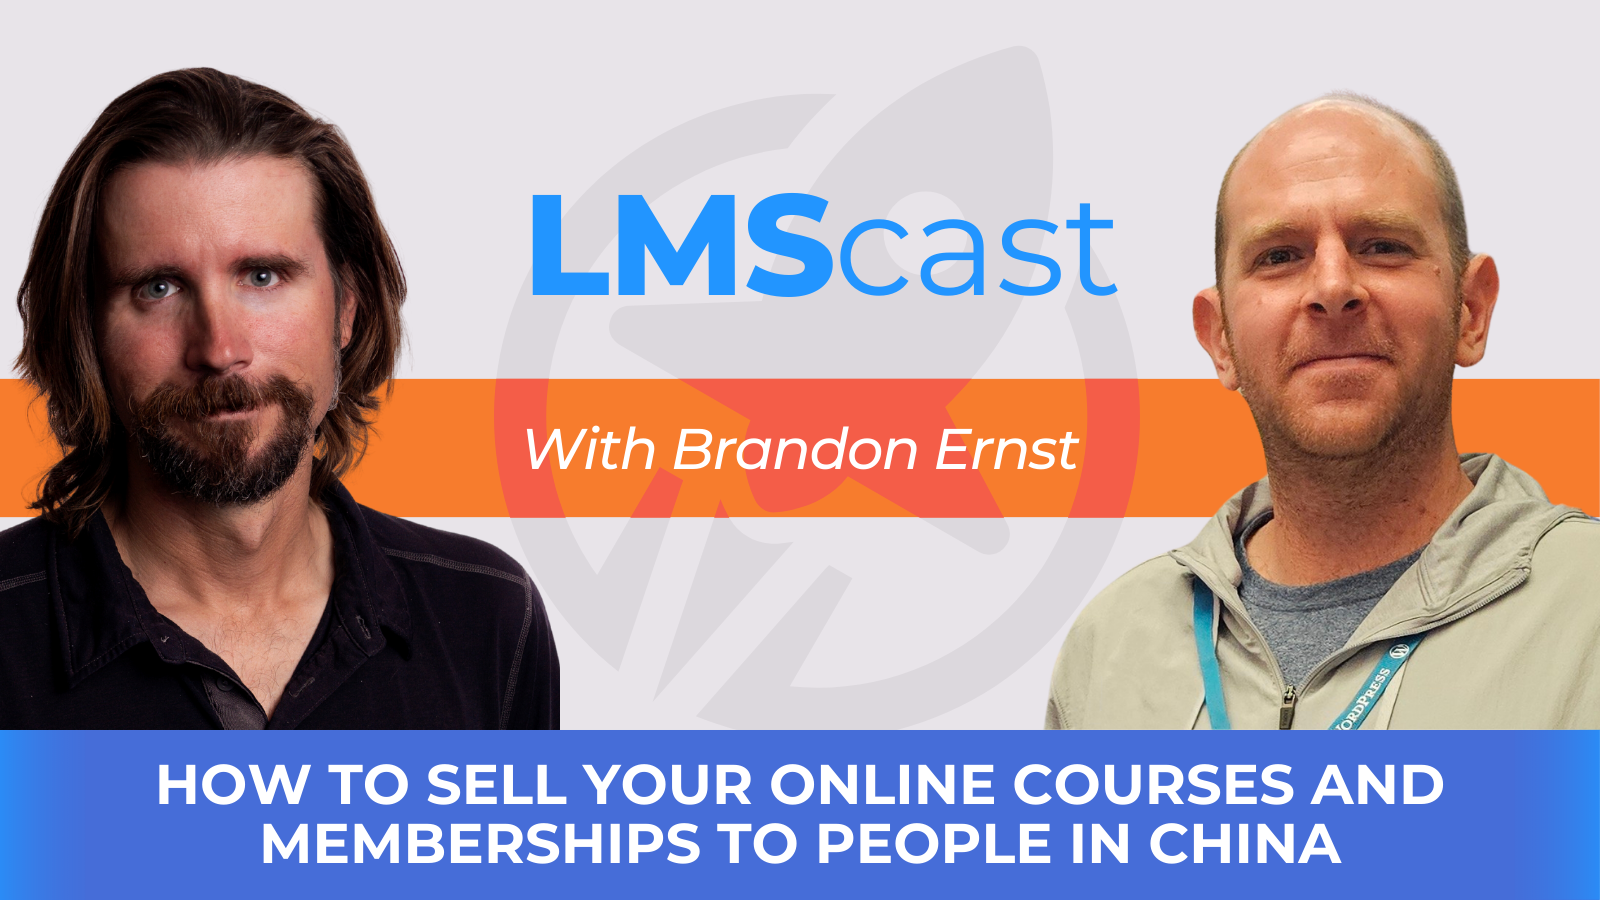 Learn how to sell your online courses and memberships to people in China effortlessly with the China Payment Plugin.